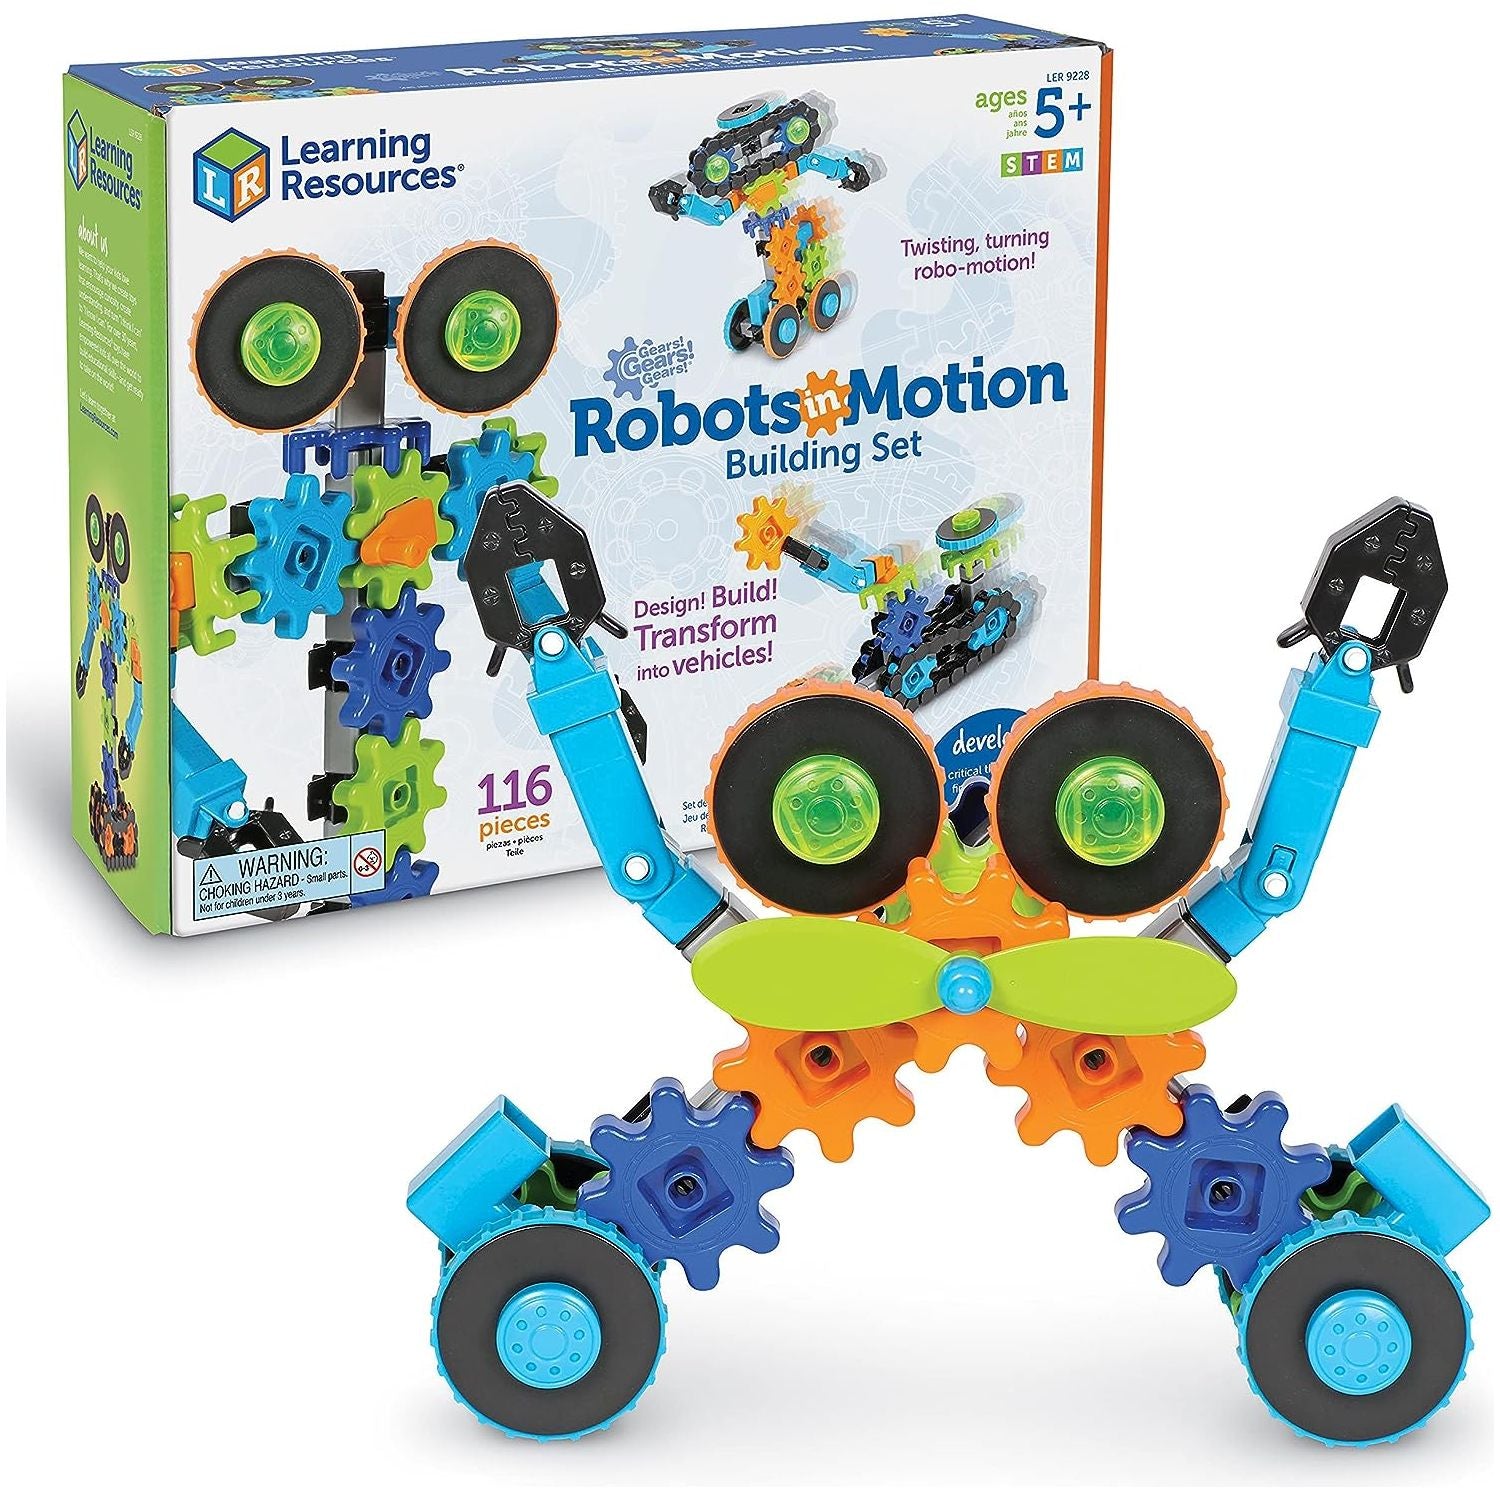 Learning Resources Gears! Gears! Gears! ロボット工場組み立てセット